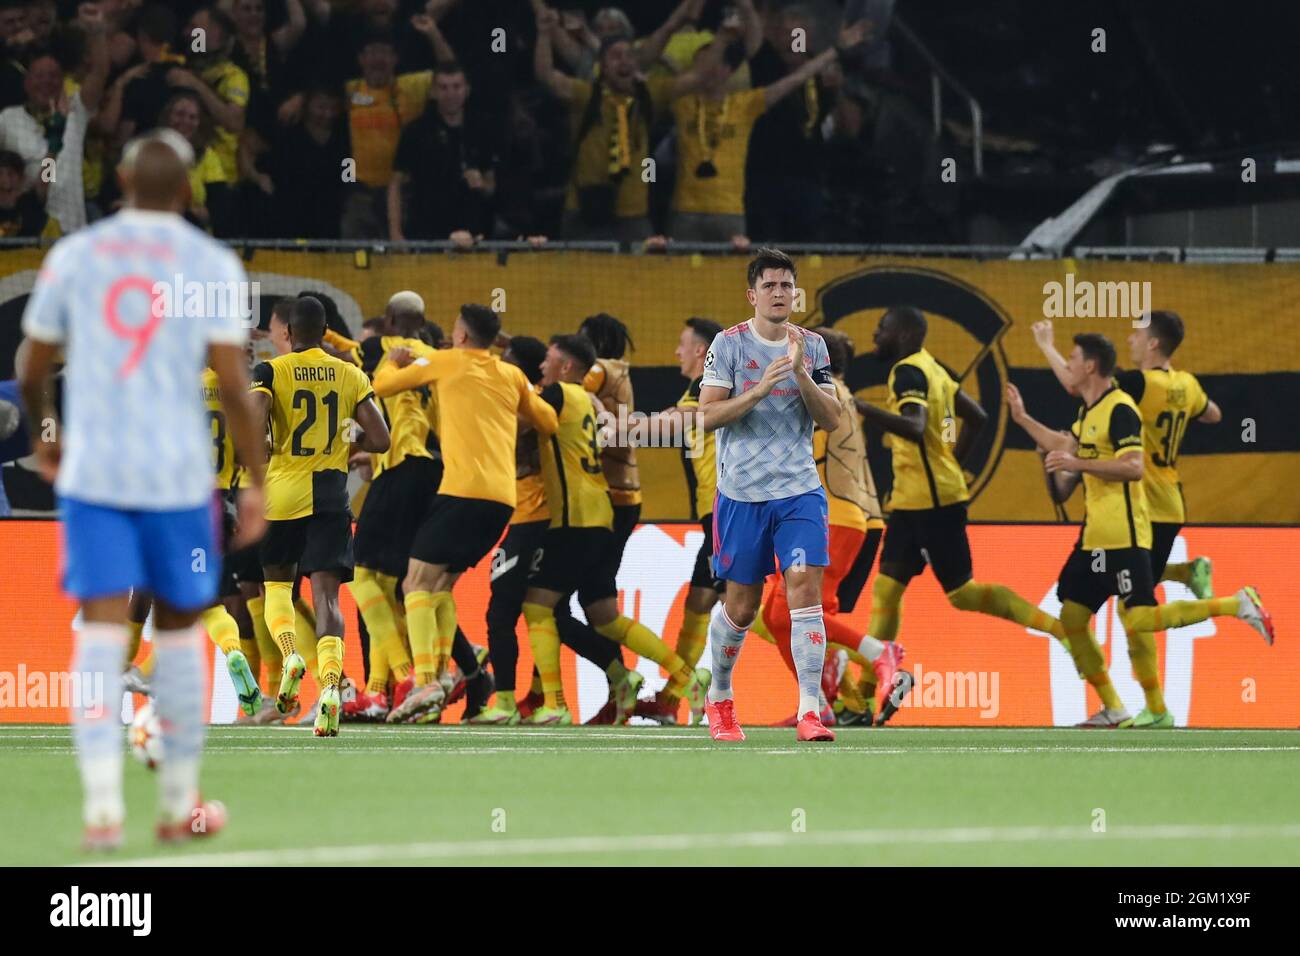 Berne, Switzerland, 14th September 2021. Harry Maguire of Manchester United  reacts as Young Boys' players celebrate in the background following Jordan  Siebatcheu's late winner during the UEFA Champions League match at Stadion